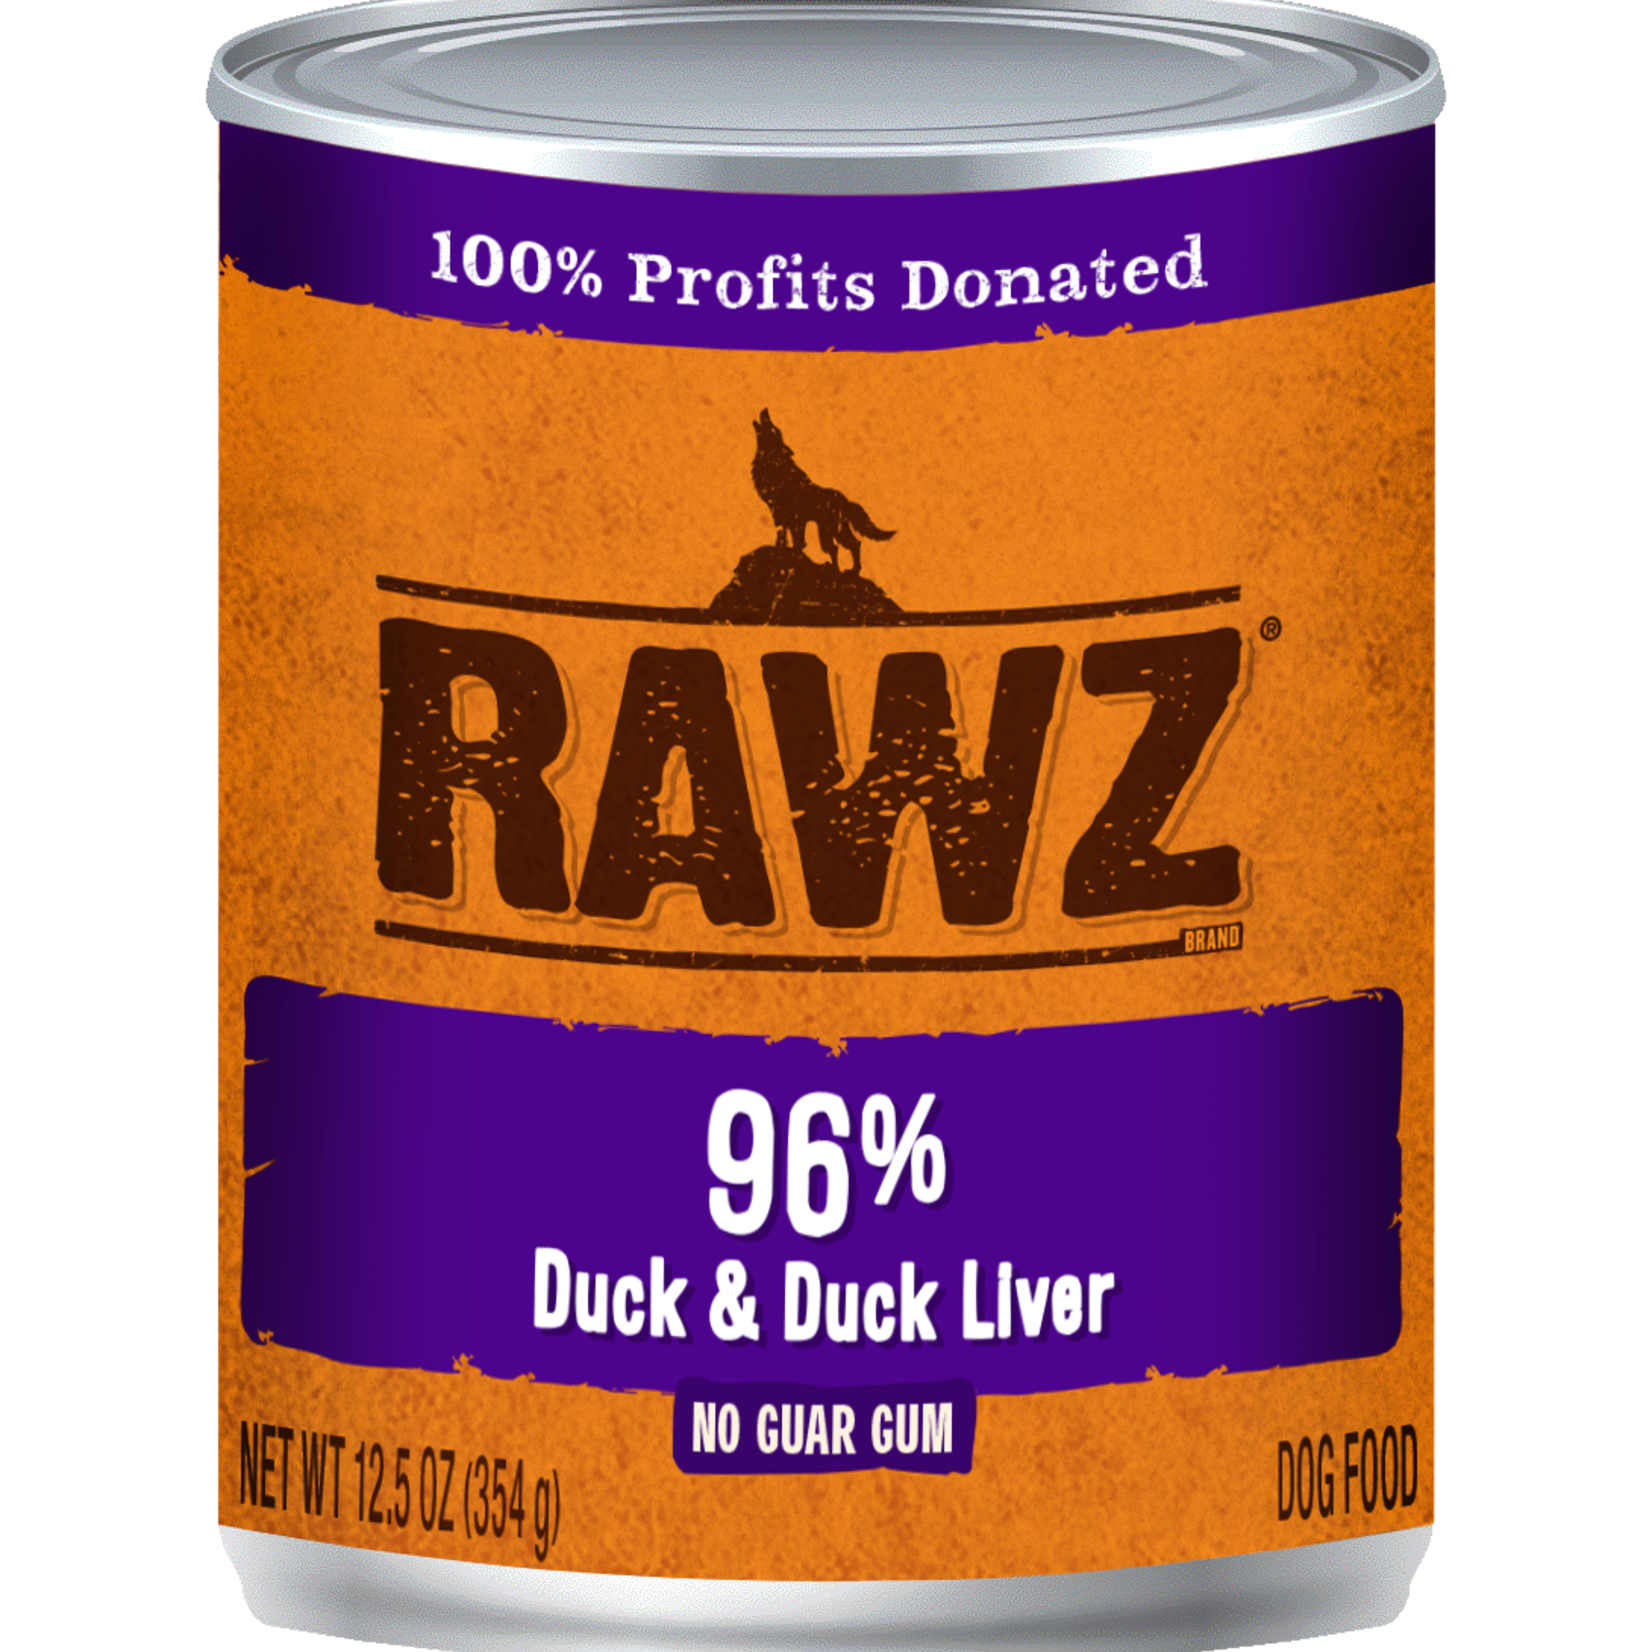 RAWZ Natural Pet Food 96% Duck & Duck Liver Canned Dog Food